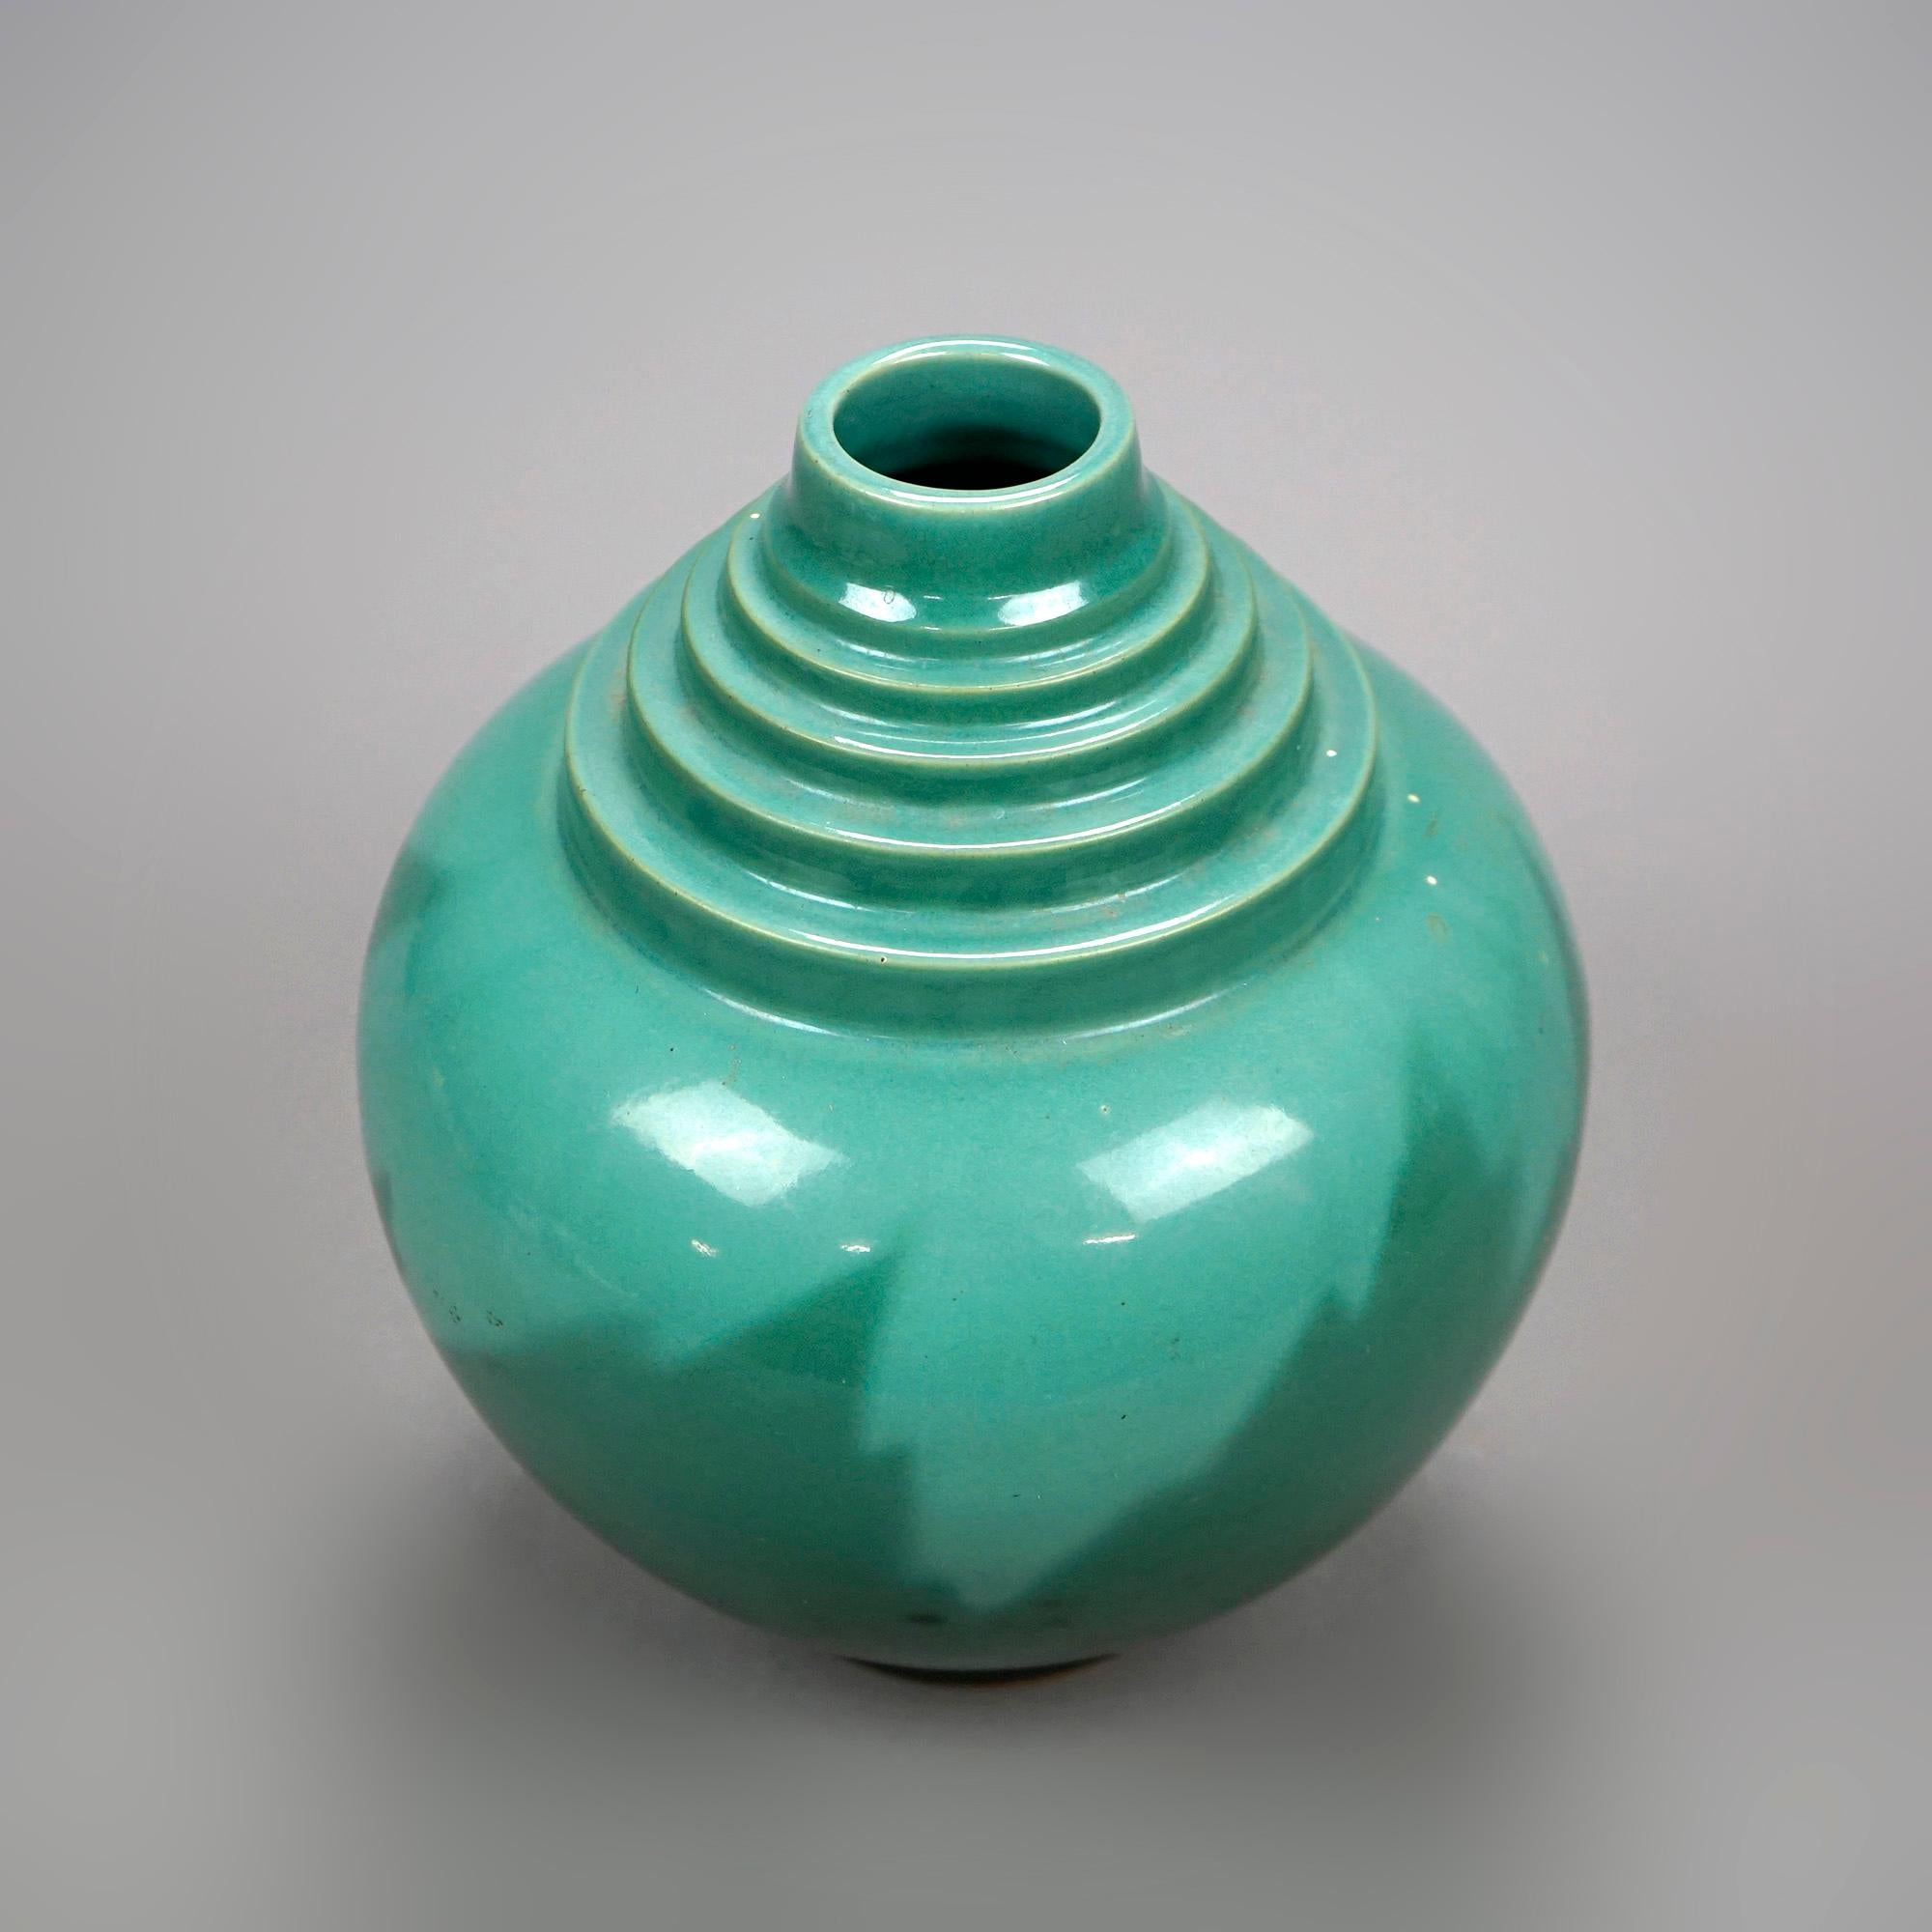 An antique Art Deco vase by Roseville of the Futura line offers spherical vessel with stepped neck, unsigned, c1930

Measures- 9.75''H x 8.25''W x 8.25''D.